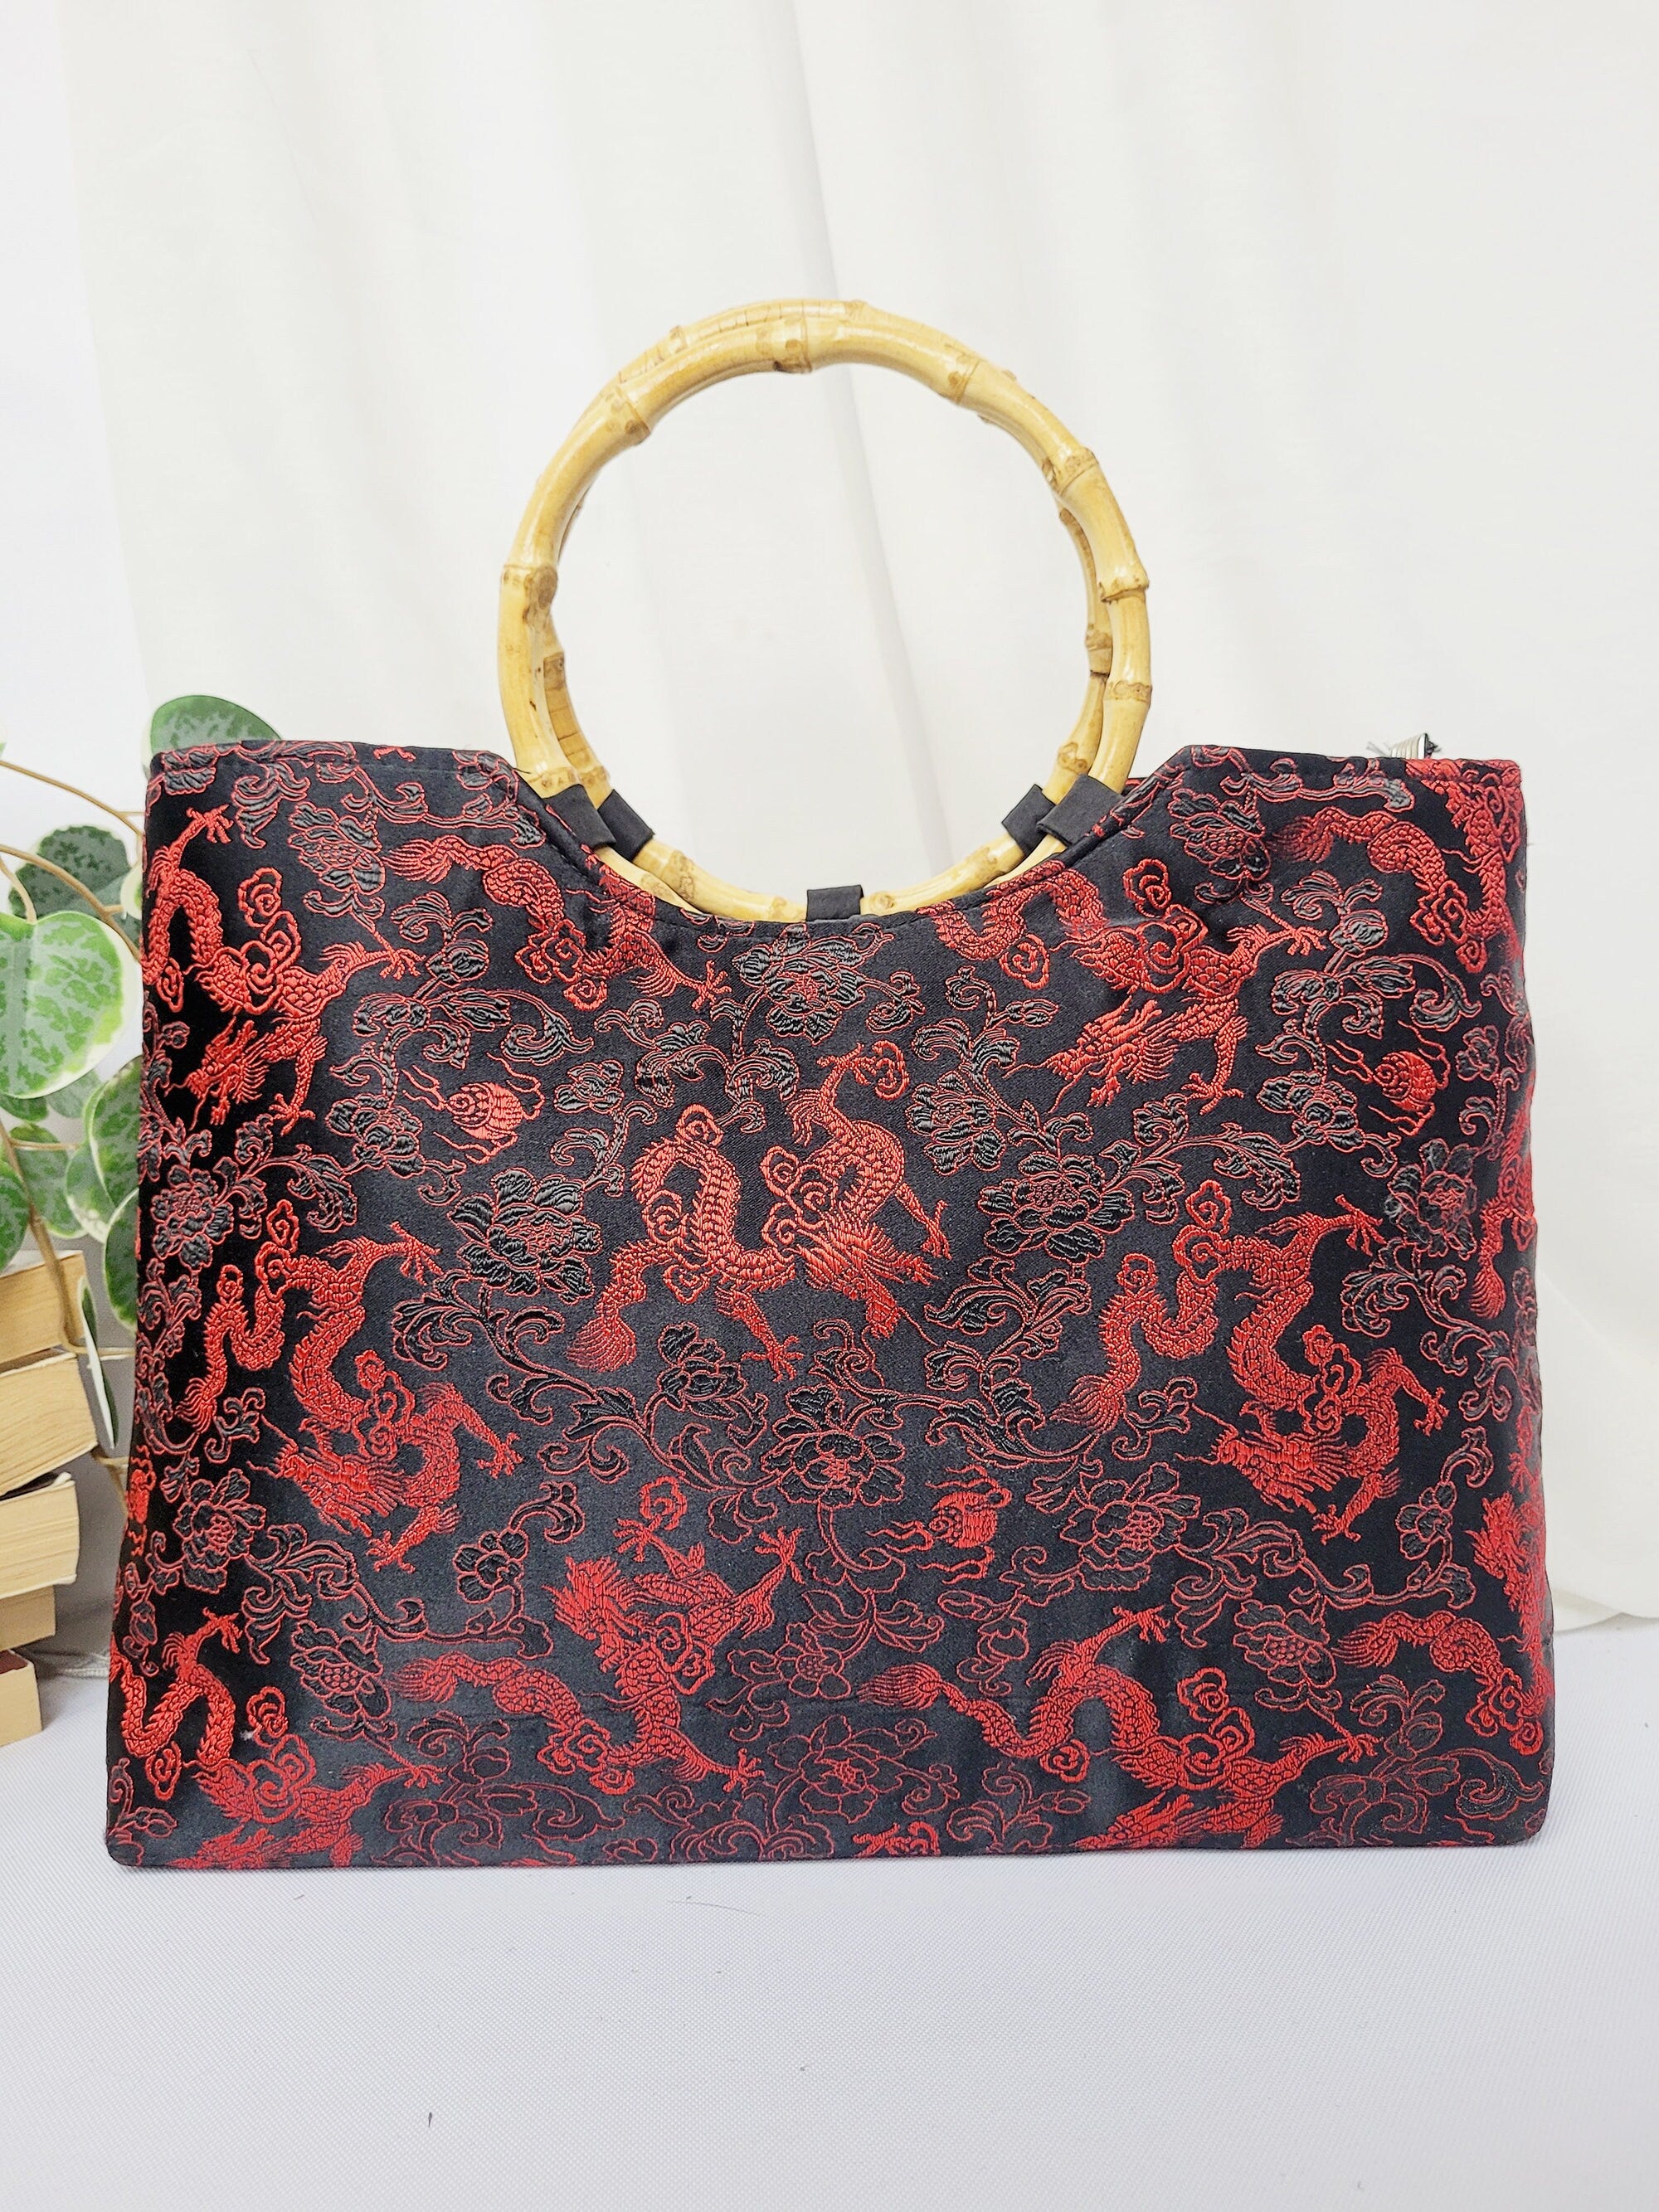 90s black & red Chinese dragon embroidery tote handbag